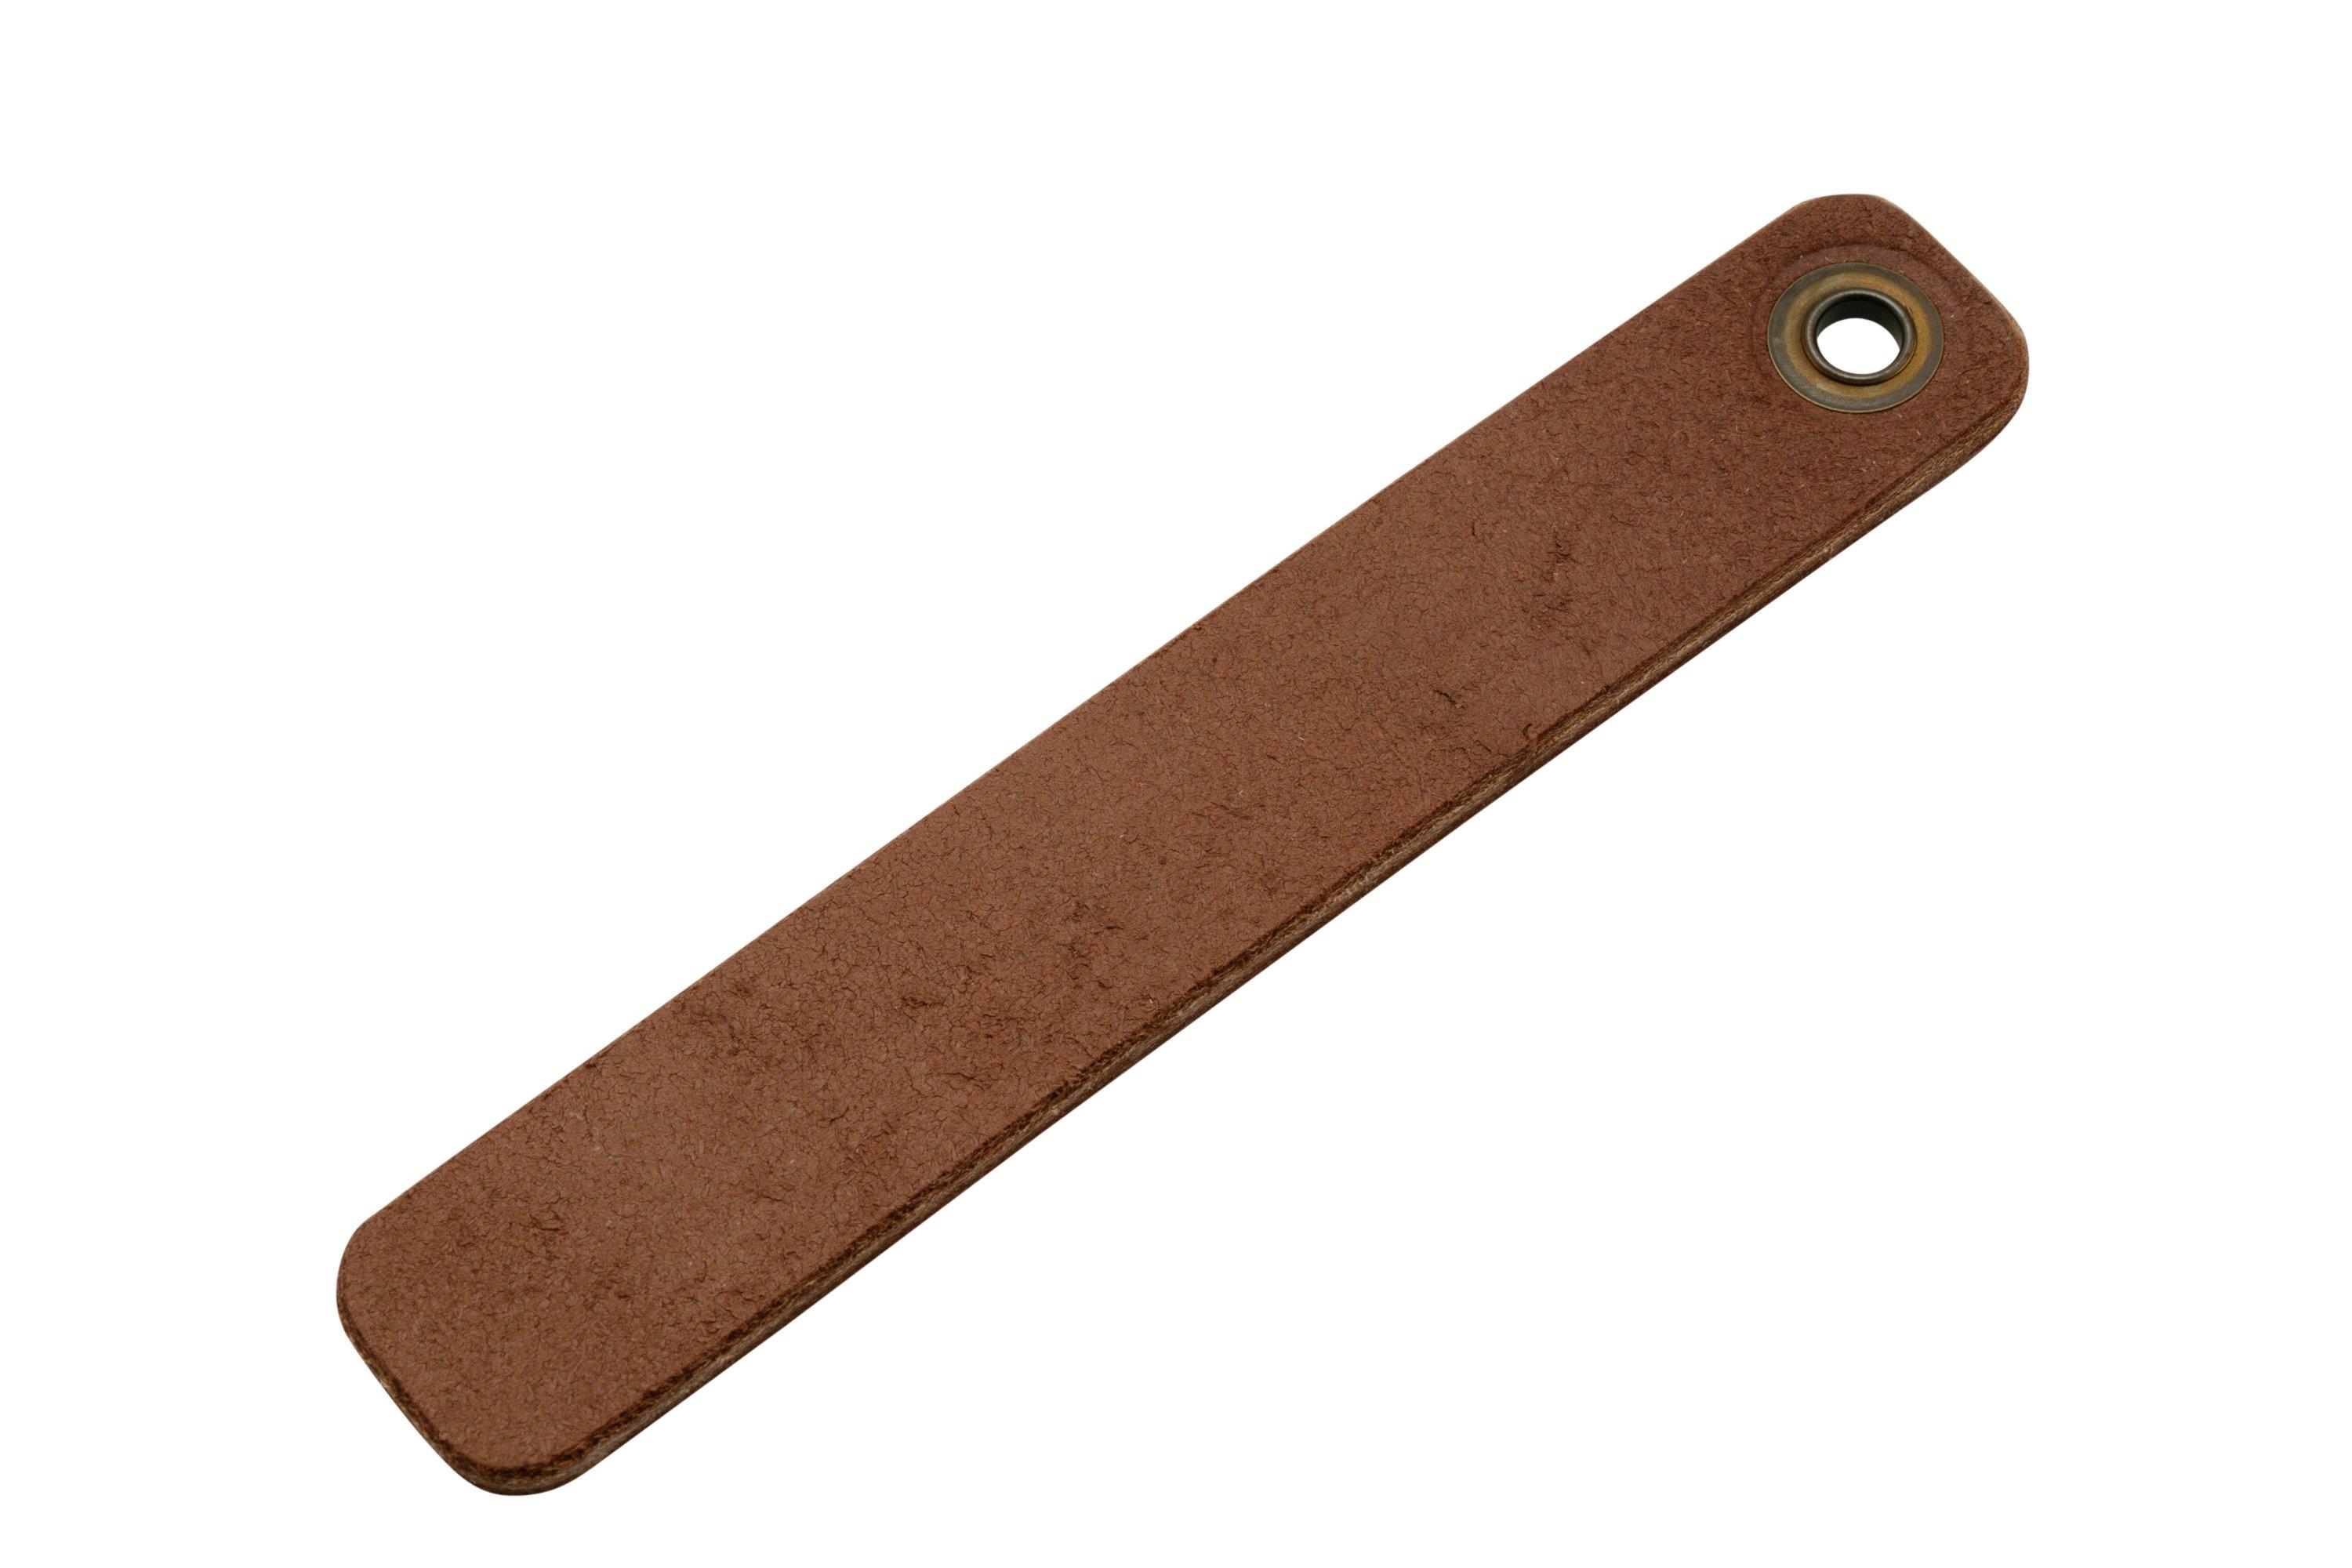  Knafs - Leather Strop for Honing Pocket Knives - Includes  Stropping Compound : Tools & Home Improvement